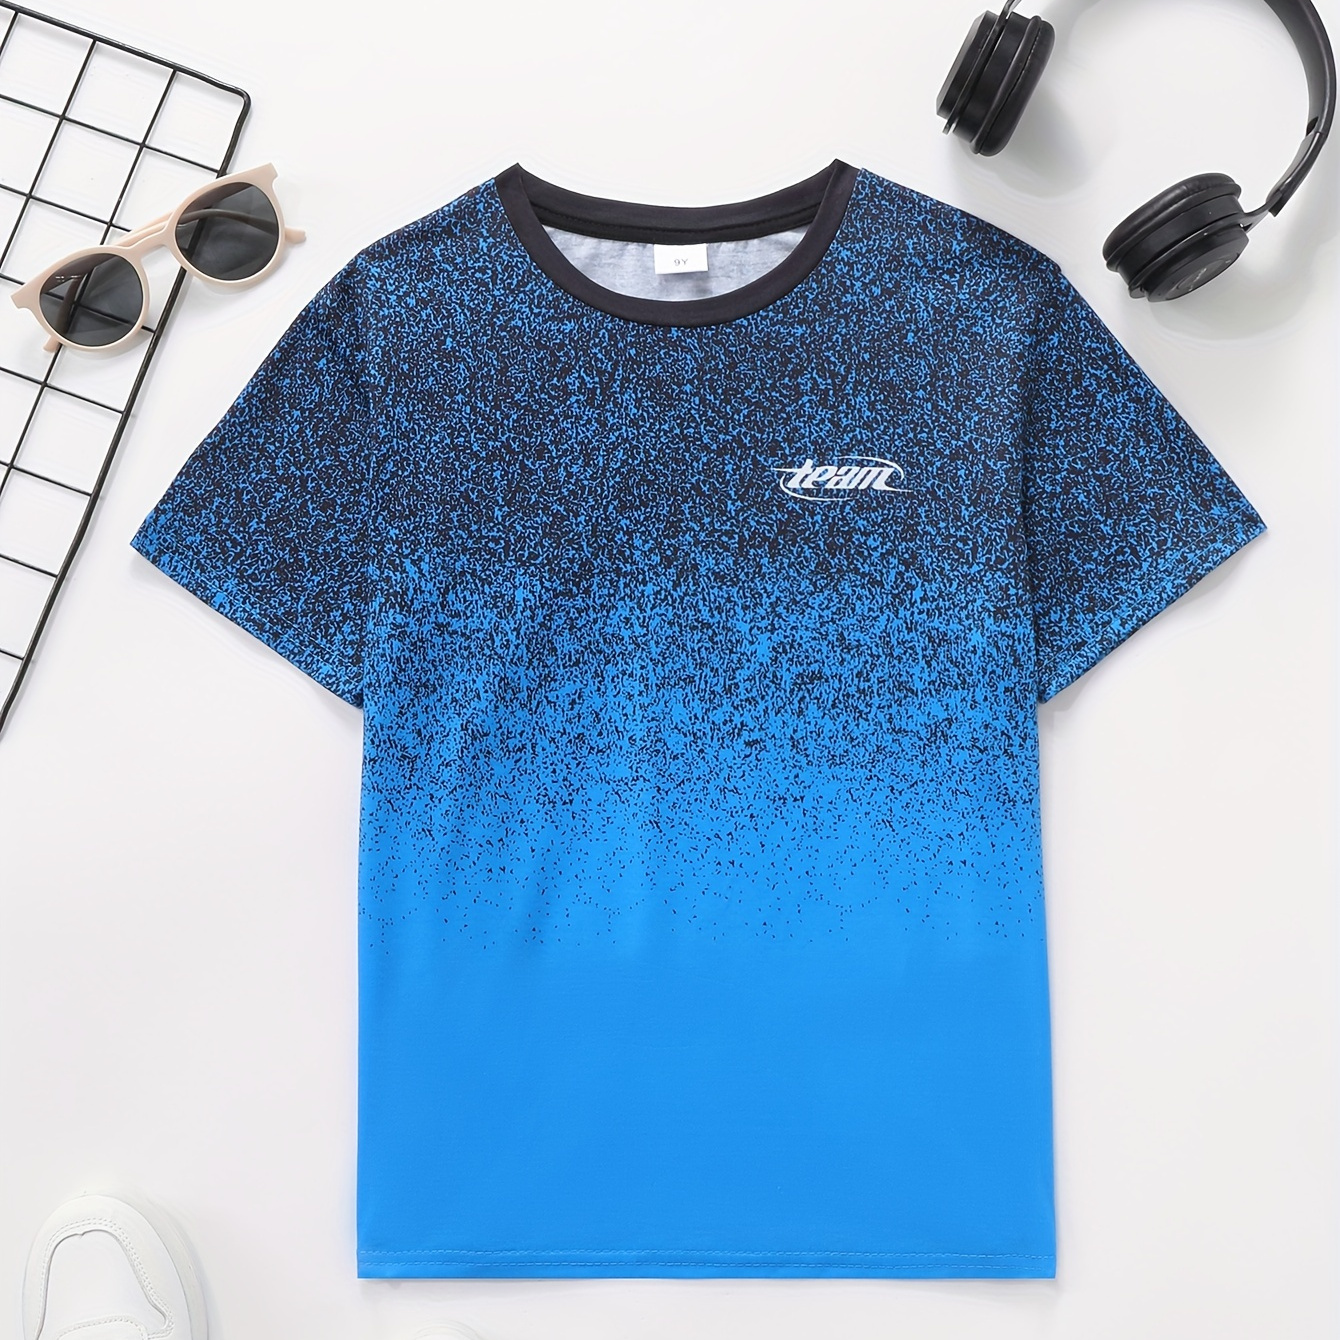 

Children's Gradient Color Vitality T-shirt, Boys Summer Sports Lightweight Comfy Round Neck Short Sleeve Casual Top